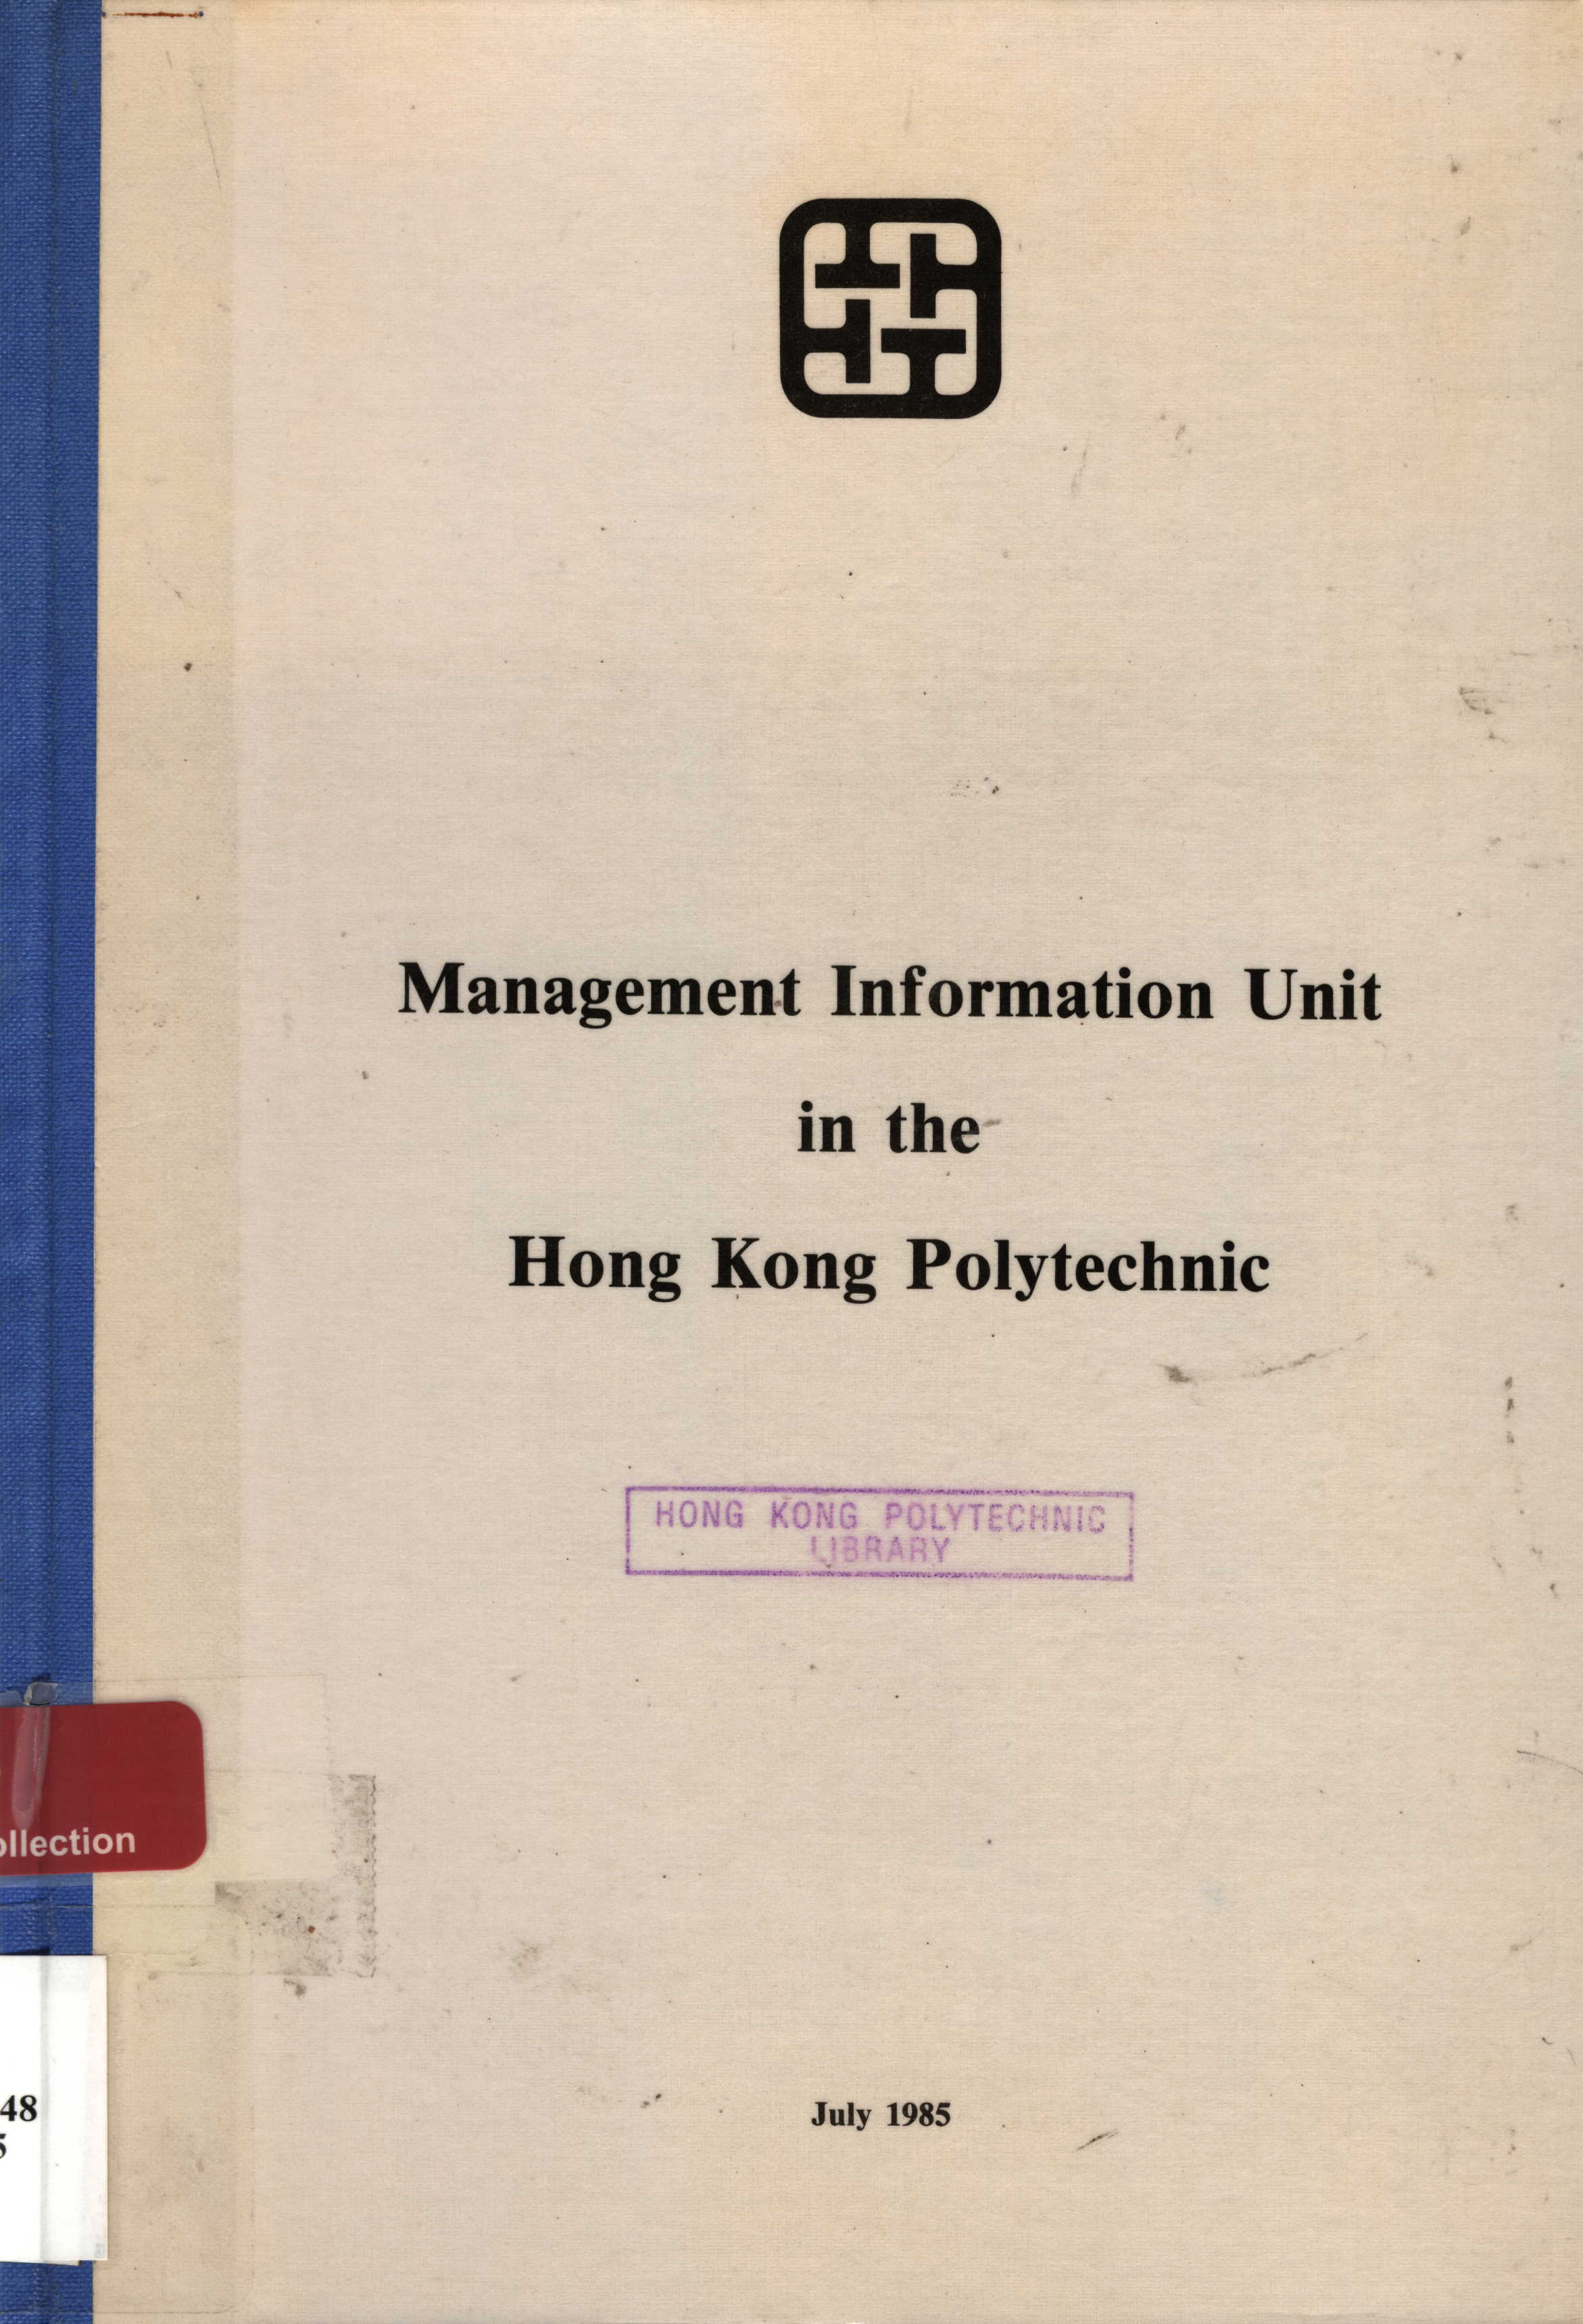 Management Information Unit in the Hong Kong Polytechnic 1985